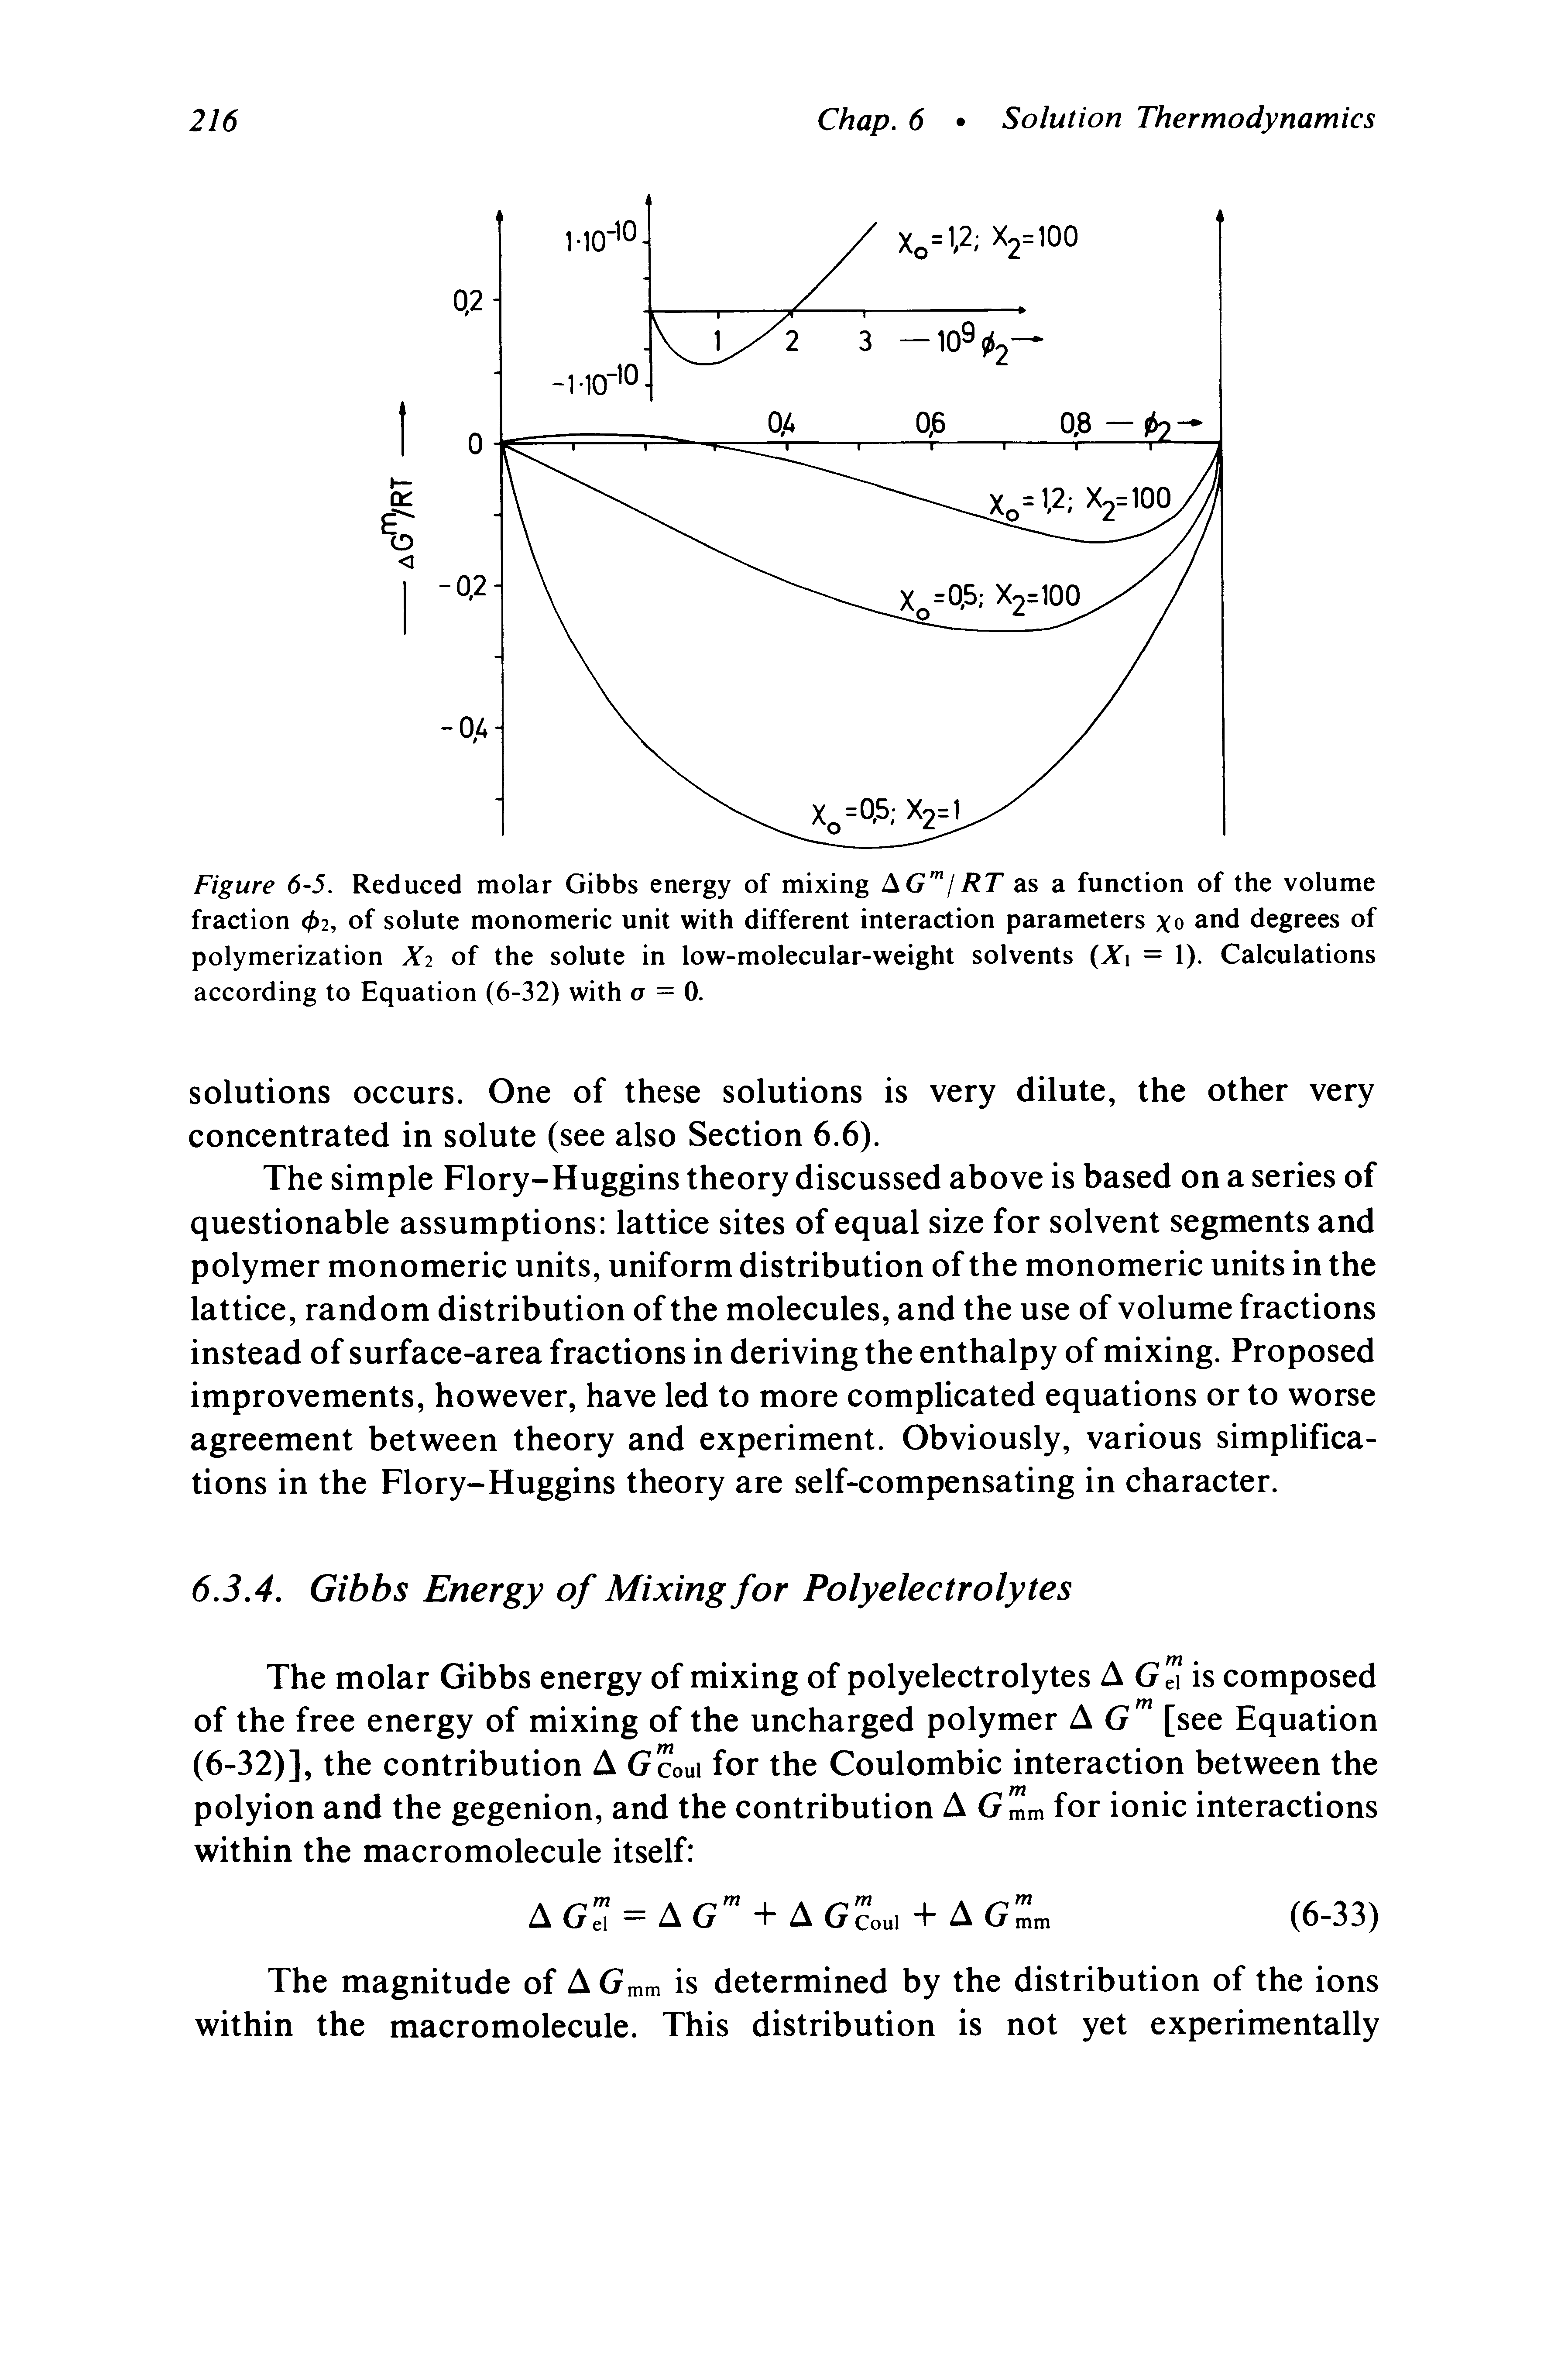 Figure 6-5. Reduced molar Gibbs energy of mixing AG "IRT as a function of the volume fraction 02, of solute monomeric unit with different interaction parameters xo and degrees of polymerization Xi of the solute in low-molecular-weight solvents (Xi = 1). Calculations according to Equation (6-32) with a = 0.